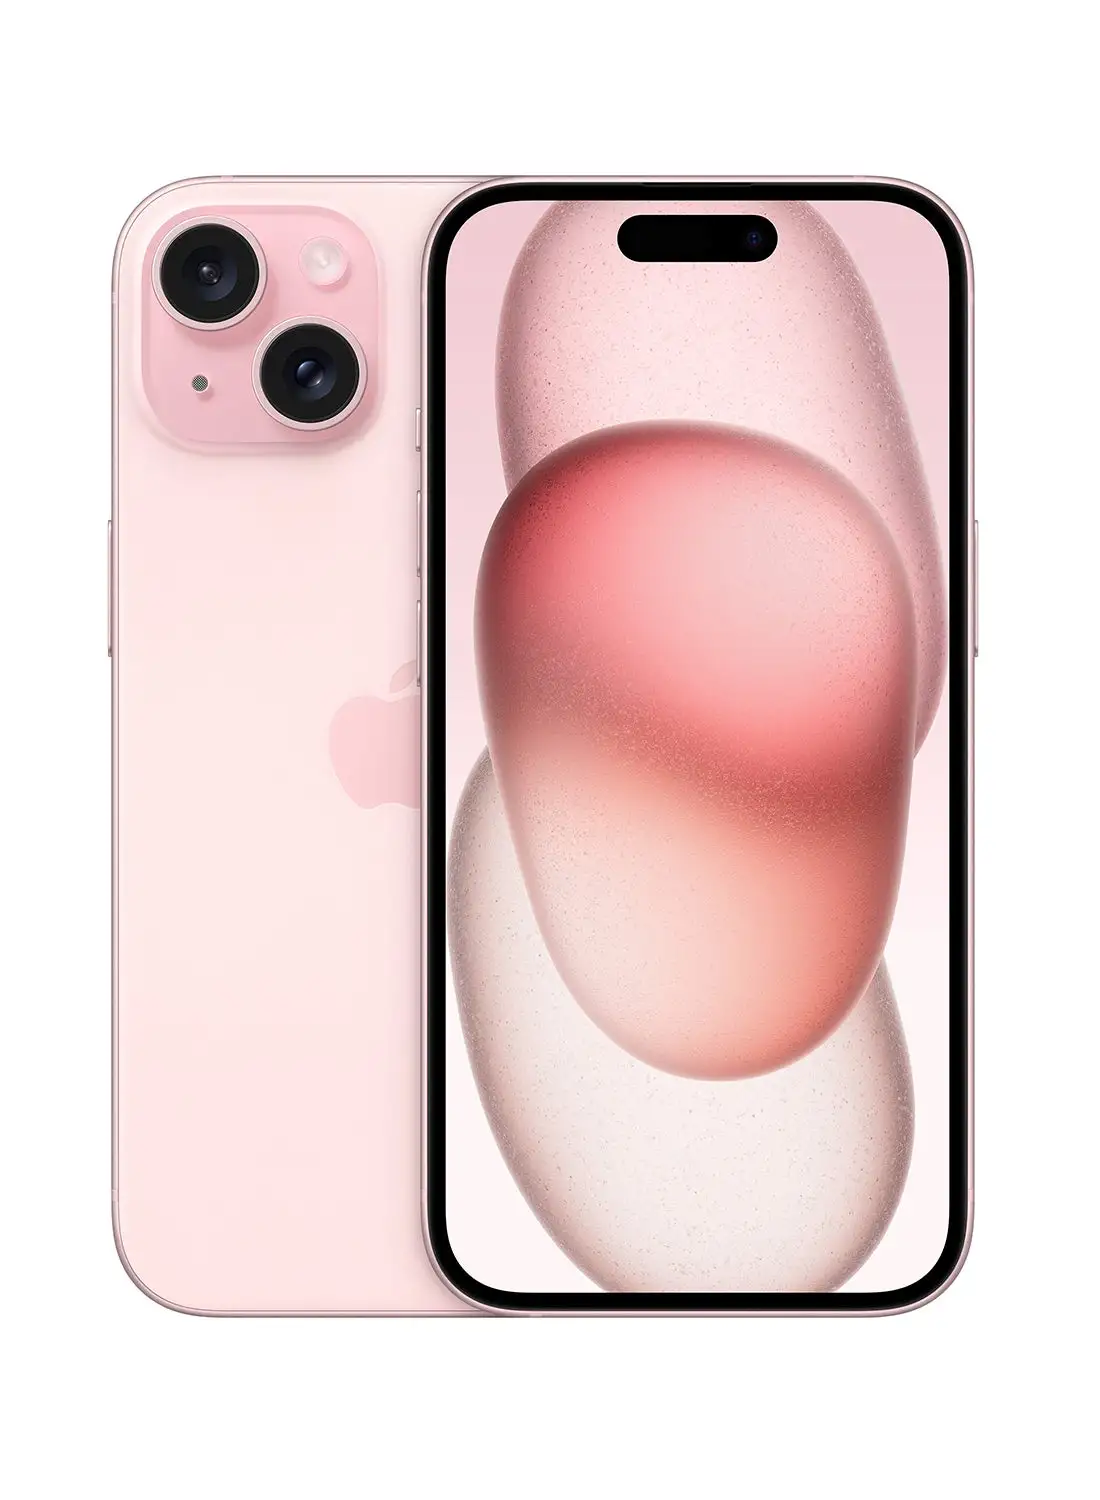 Apple iPhone 15 128GB Pink 5G With FaceTime - International Version